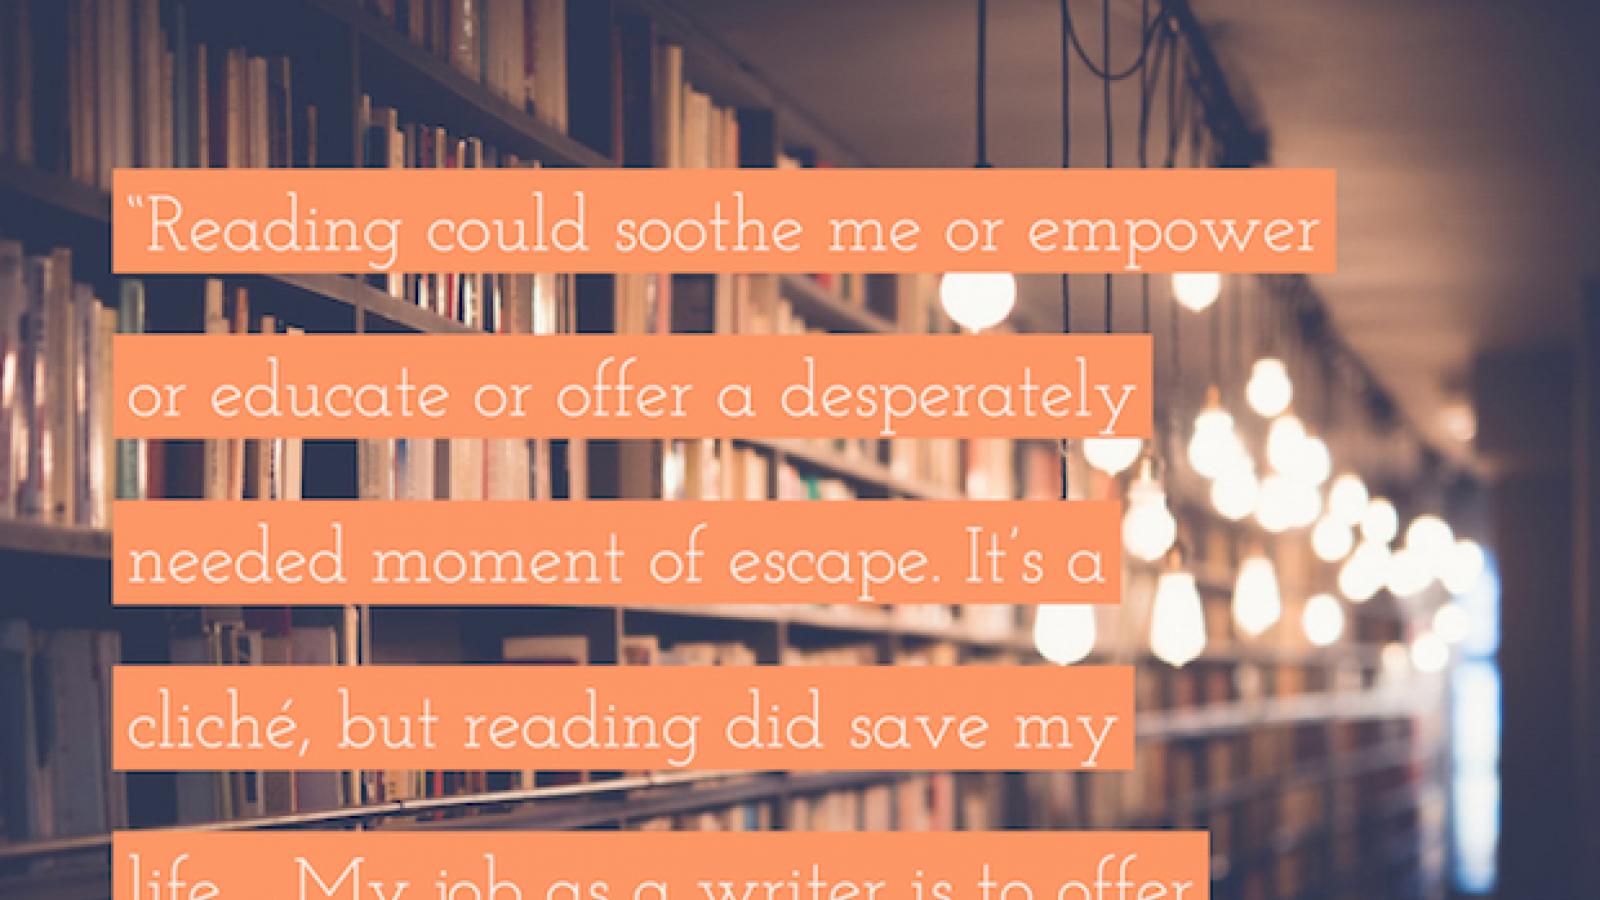 Reading could soothe me or empower or educate or offer a desperately needed moment of escape. It's a cliché, but reading did save my life.... My job as a writer is to offer at least some small part of what saved me to others. — Sandra G Lambert